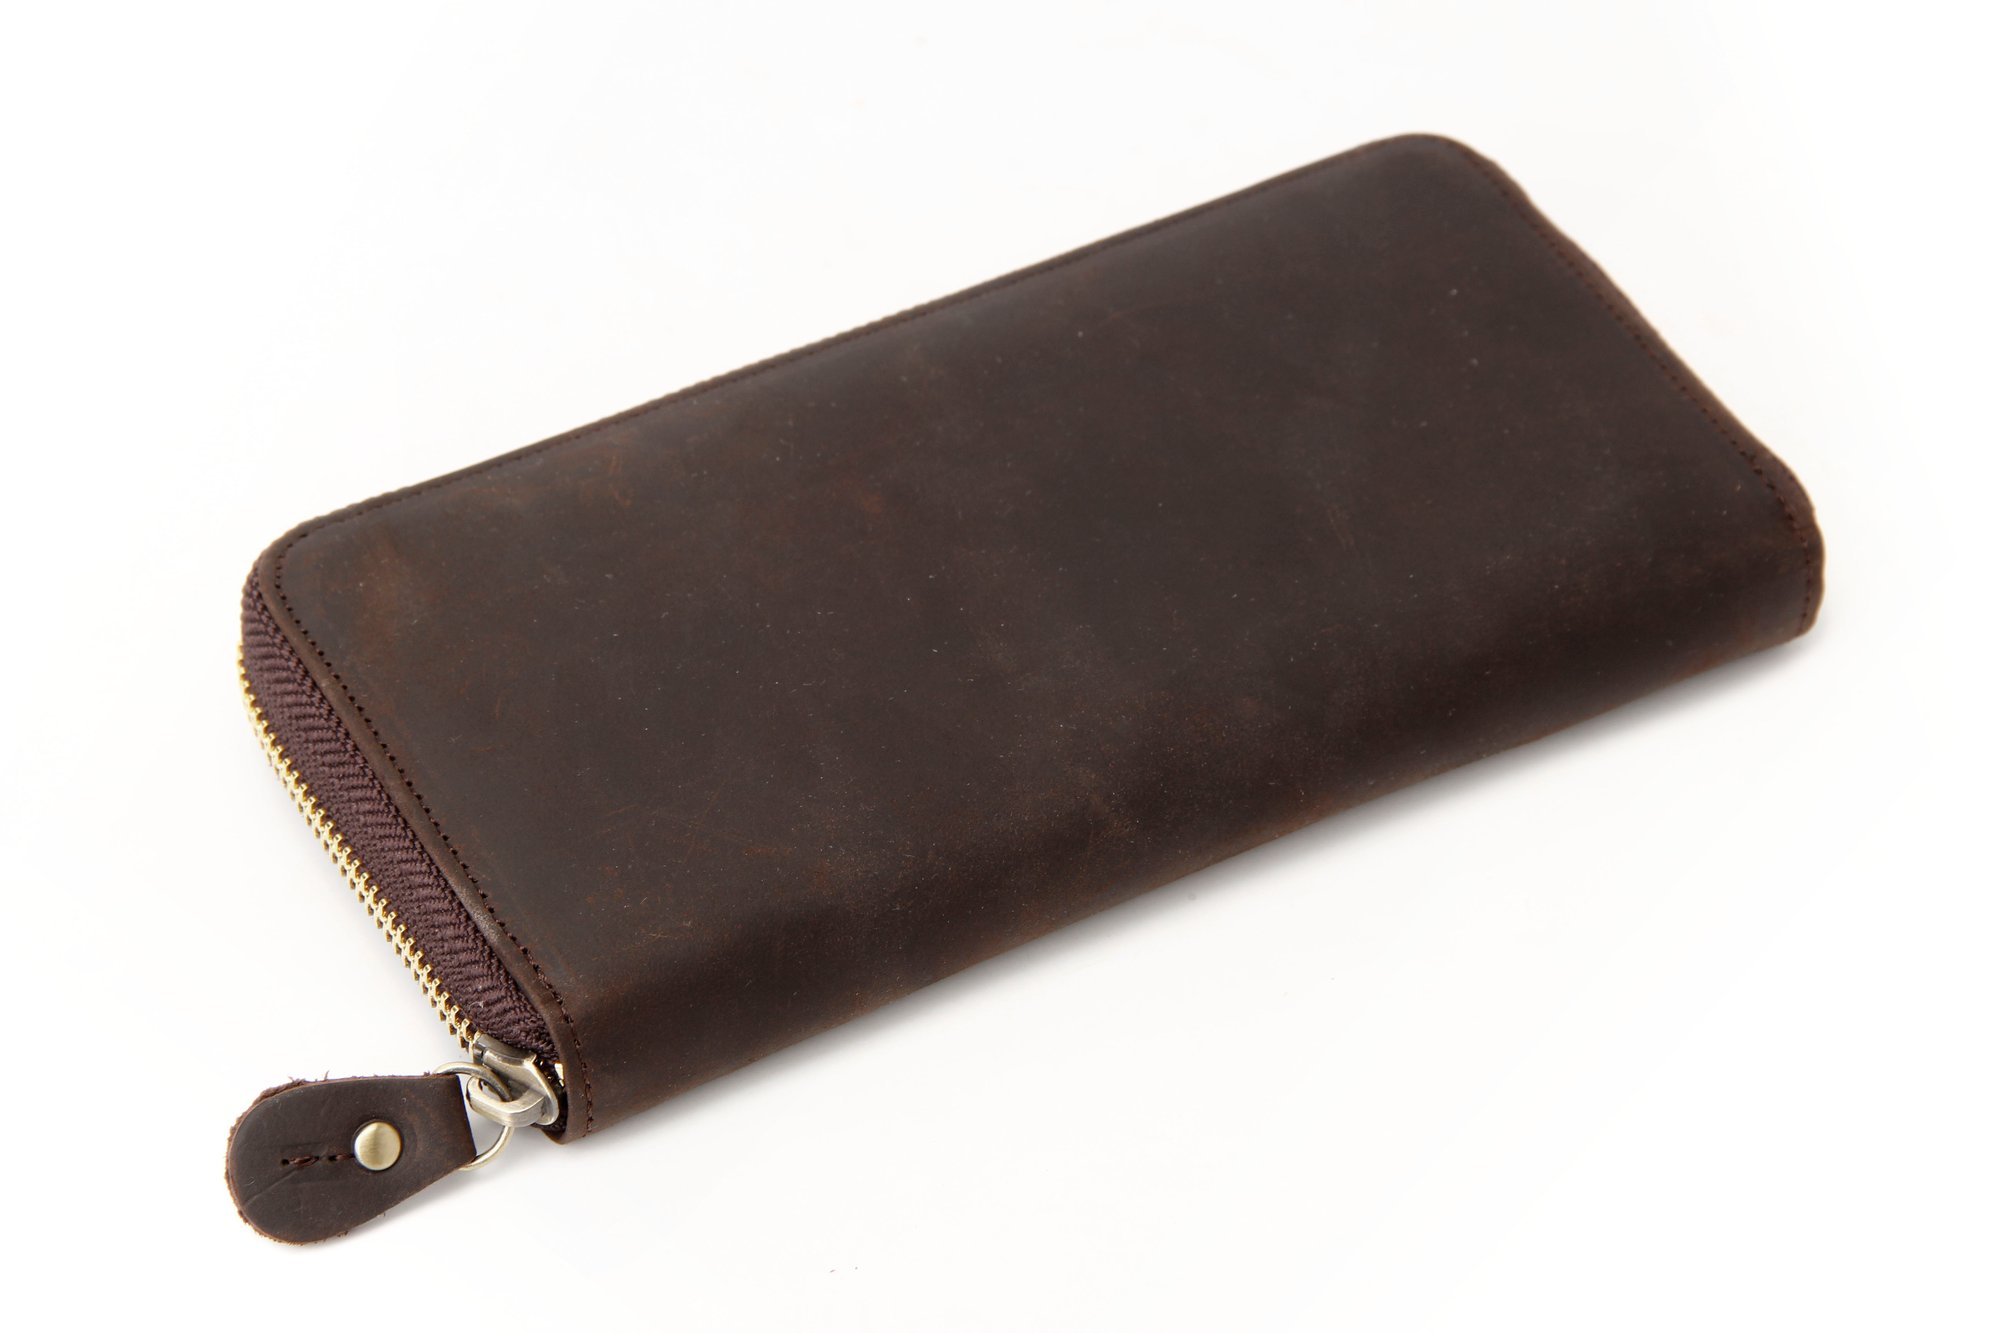 Wholesale Leather Money Bag - Buy Reliable Leather Money Bag from